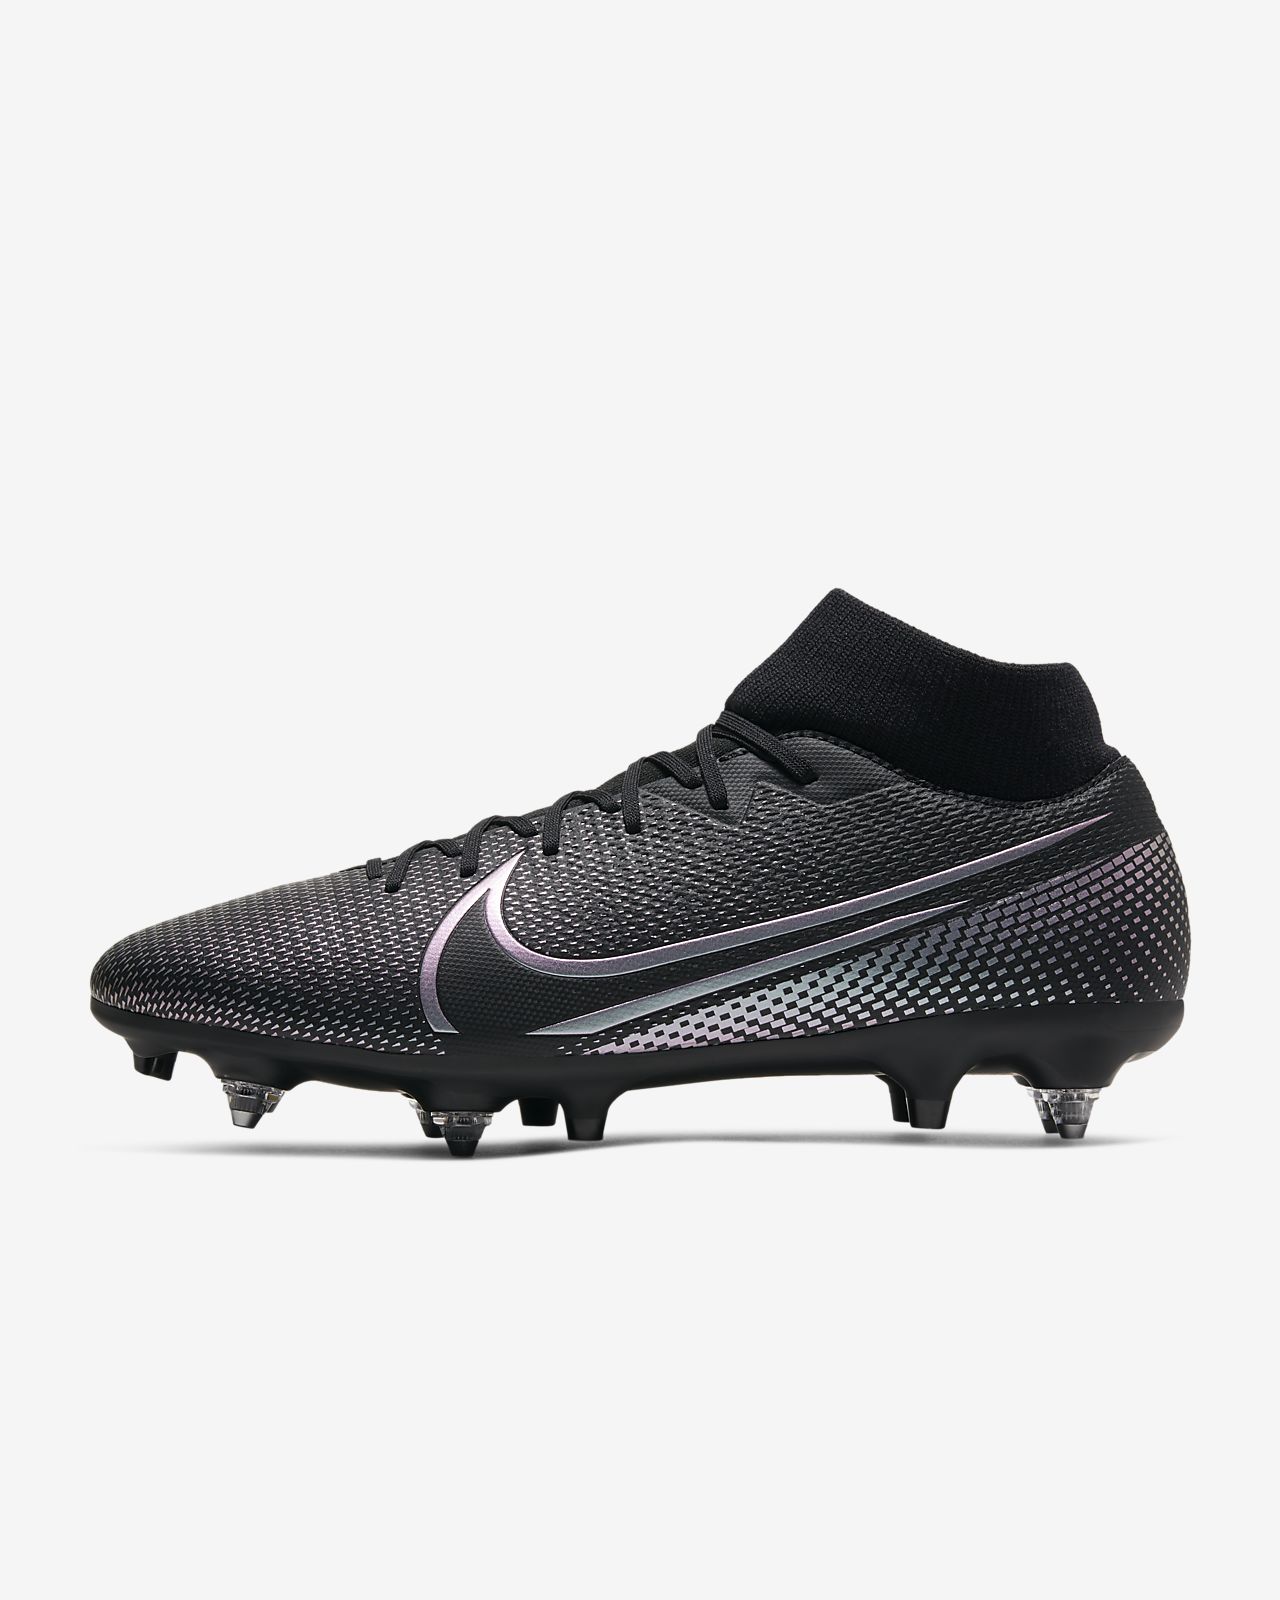 nike rugby boots metal studs